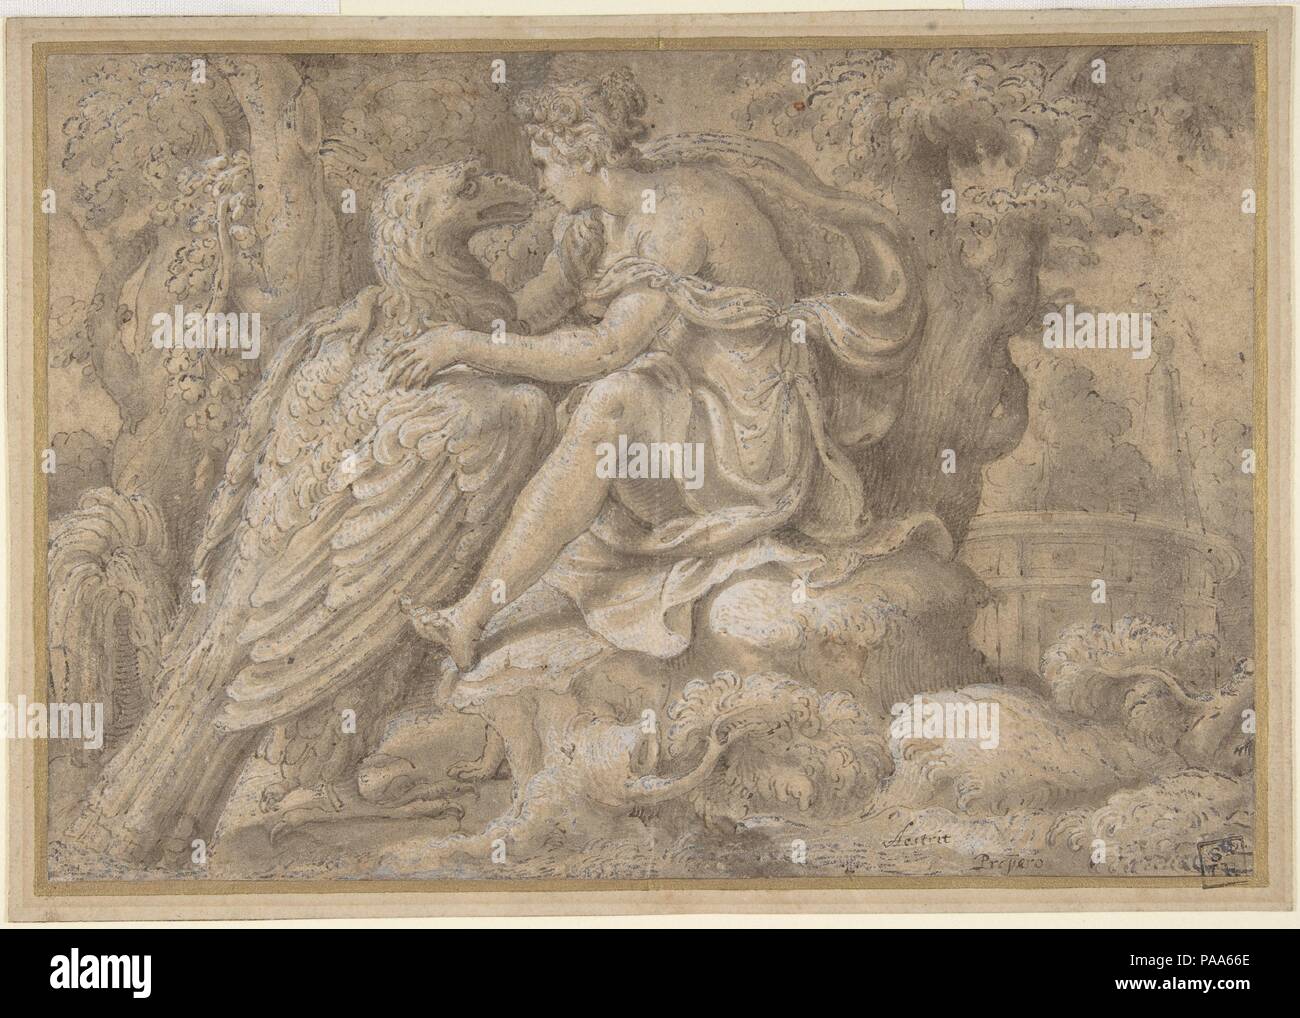 Jupiter and Astraea. Artist: Giulio Campi (Italian, Cremona 1502-1572). Dimensions: Sheet: 6 1/4 x 9 1/8 in. (15.9 x 23.1 cm). Date: ca. 1545-50.  According to Ovid's 'Metamorphoses,' the most consulted mythological text in the Renaissance, when human wickedness forced the Gods to abandon the earthly realm, Astraea, the goddess of Justice, was the last to flee to the heavens where she transformed into the constellation Virgo. In Campi's drawing, Astraea, identified by an inscription at the lower right, Aestrit, is shown not with her scales but rather in an amorous embrace with Jupiter, who has Stock Photo